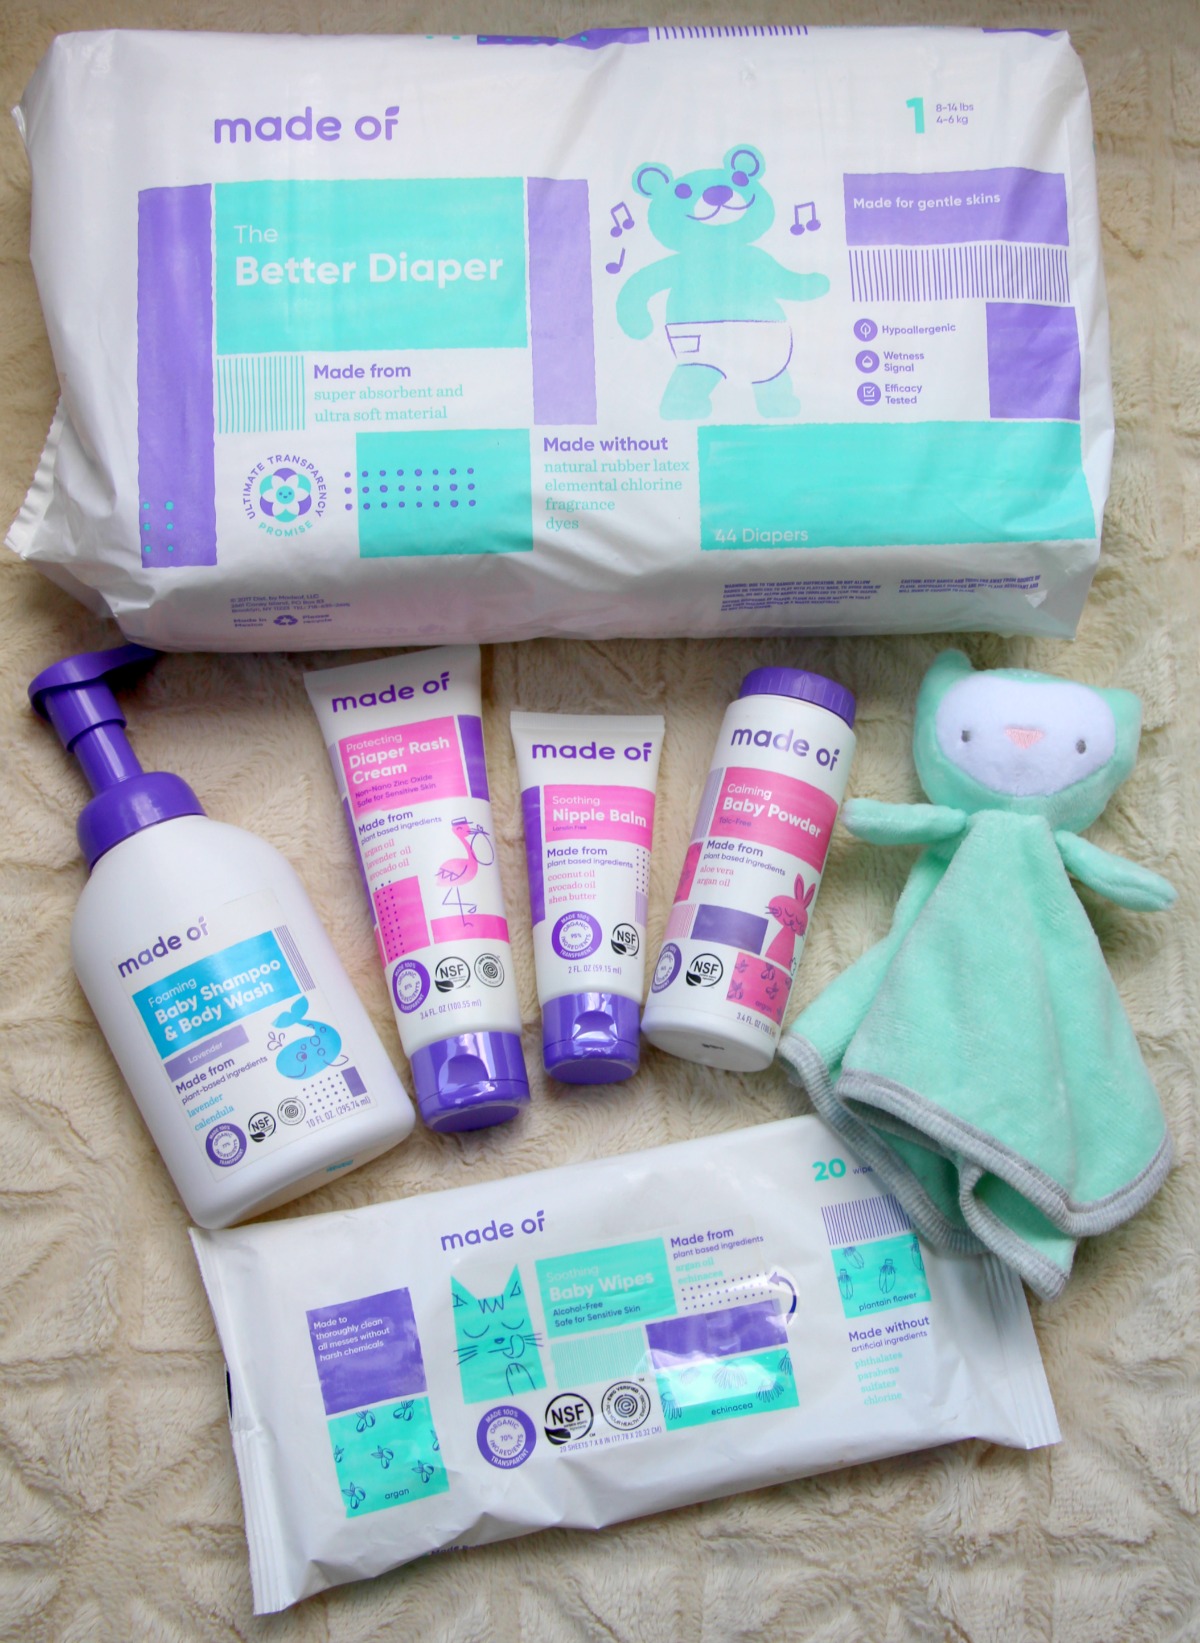 The Safest & Most Transparent Baby Skincare & Diapering!